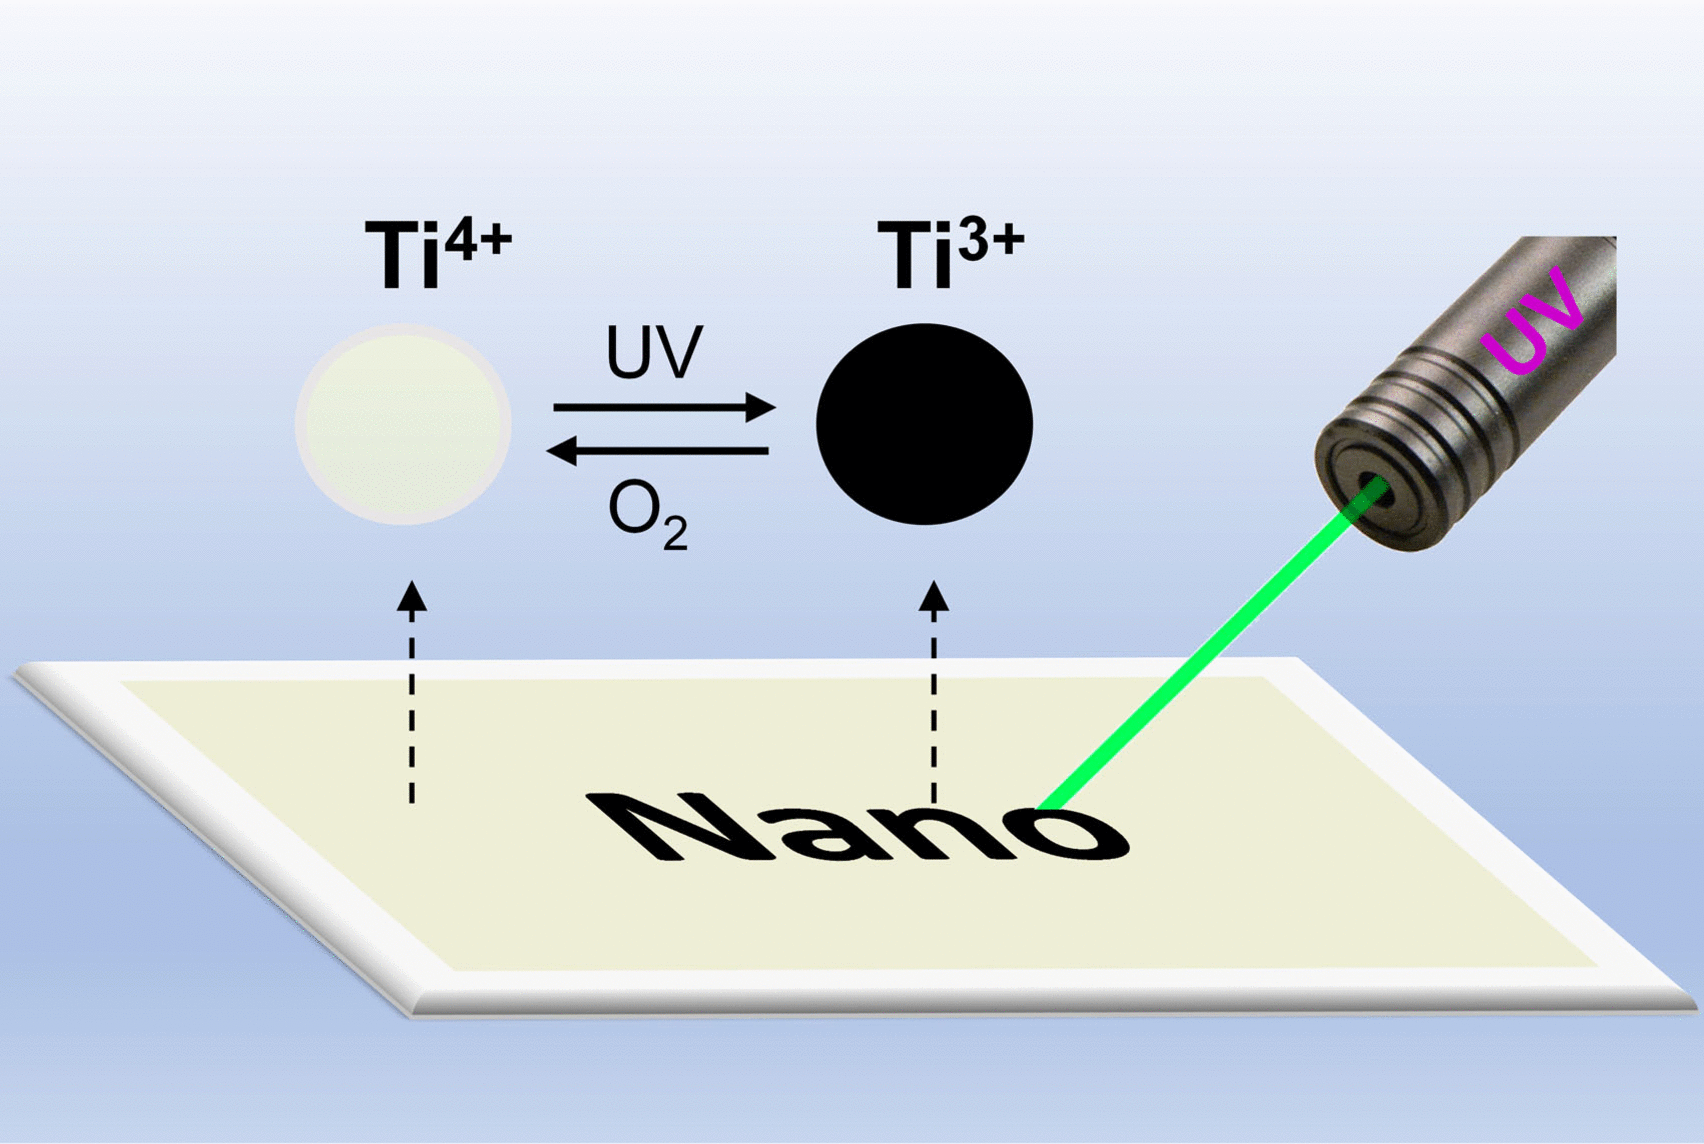 Researchers Develop Coating Material from TiO2 Nanocrystals to Produce Light-sensitive, Rewritable System.